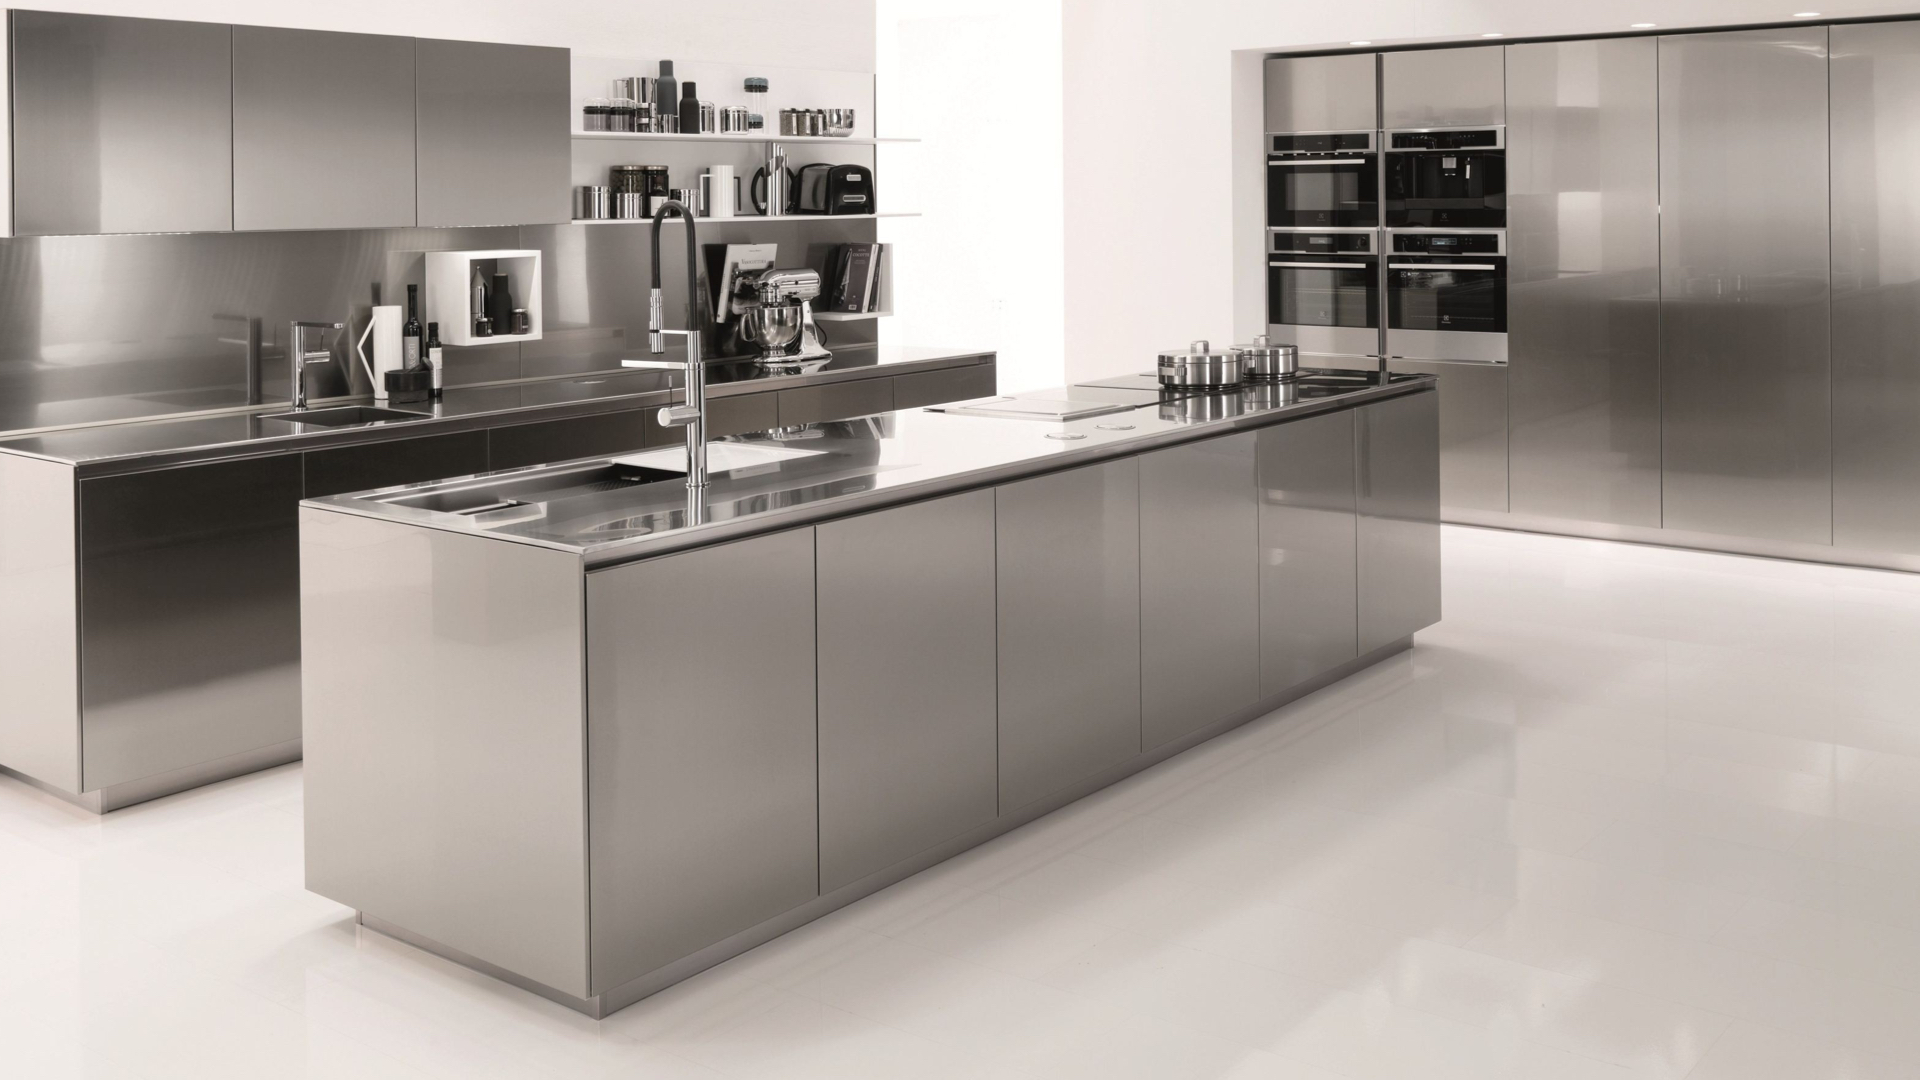 oak and stainless steel kitchen design